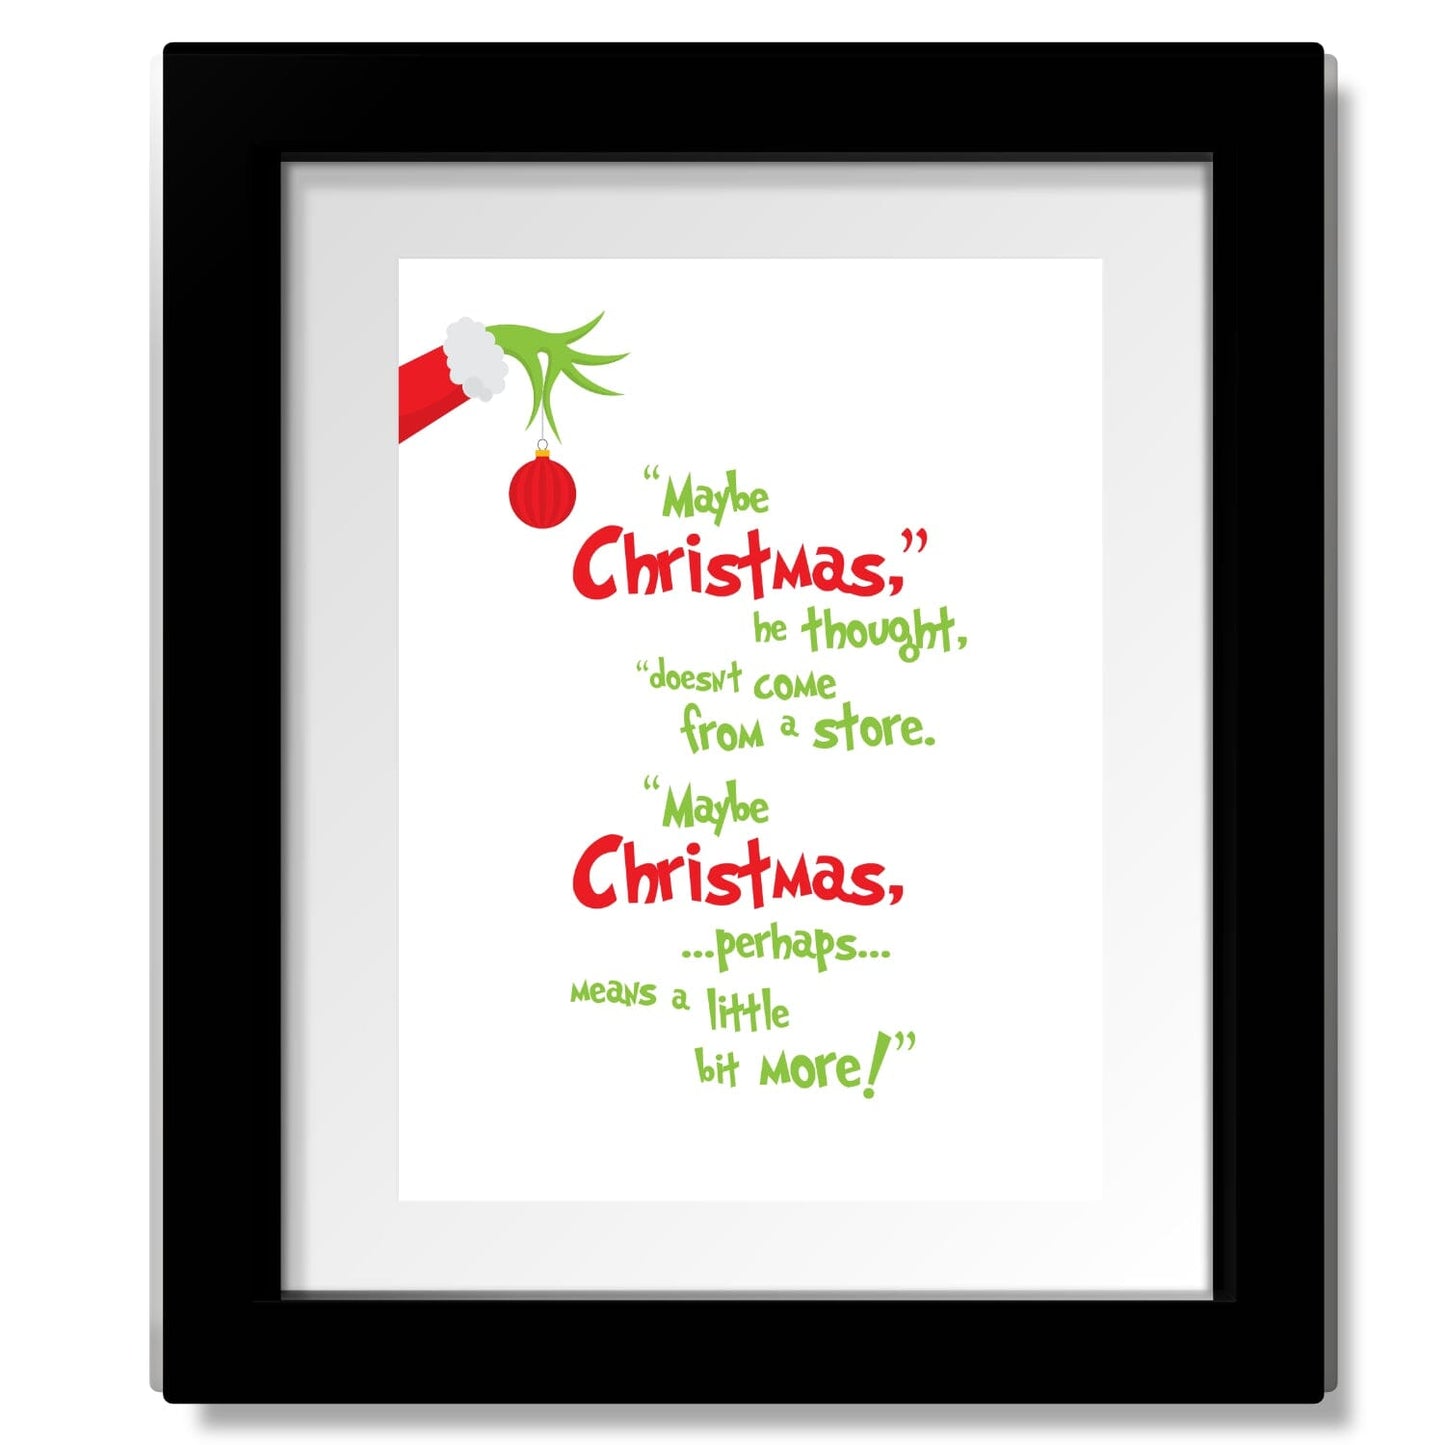 The Christmas Grinch - Dr. Suess Quote Print - White Version Song Lyrics Art Song Lyrics Art 8x10 Framed Matted Print 